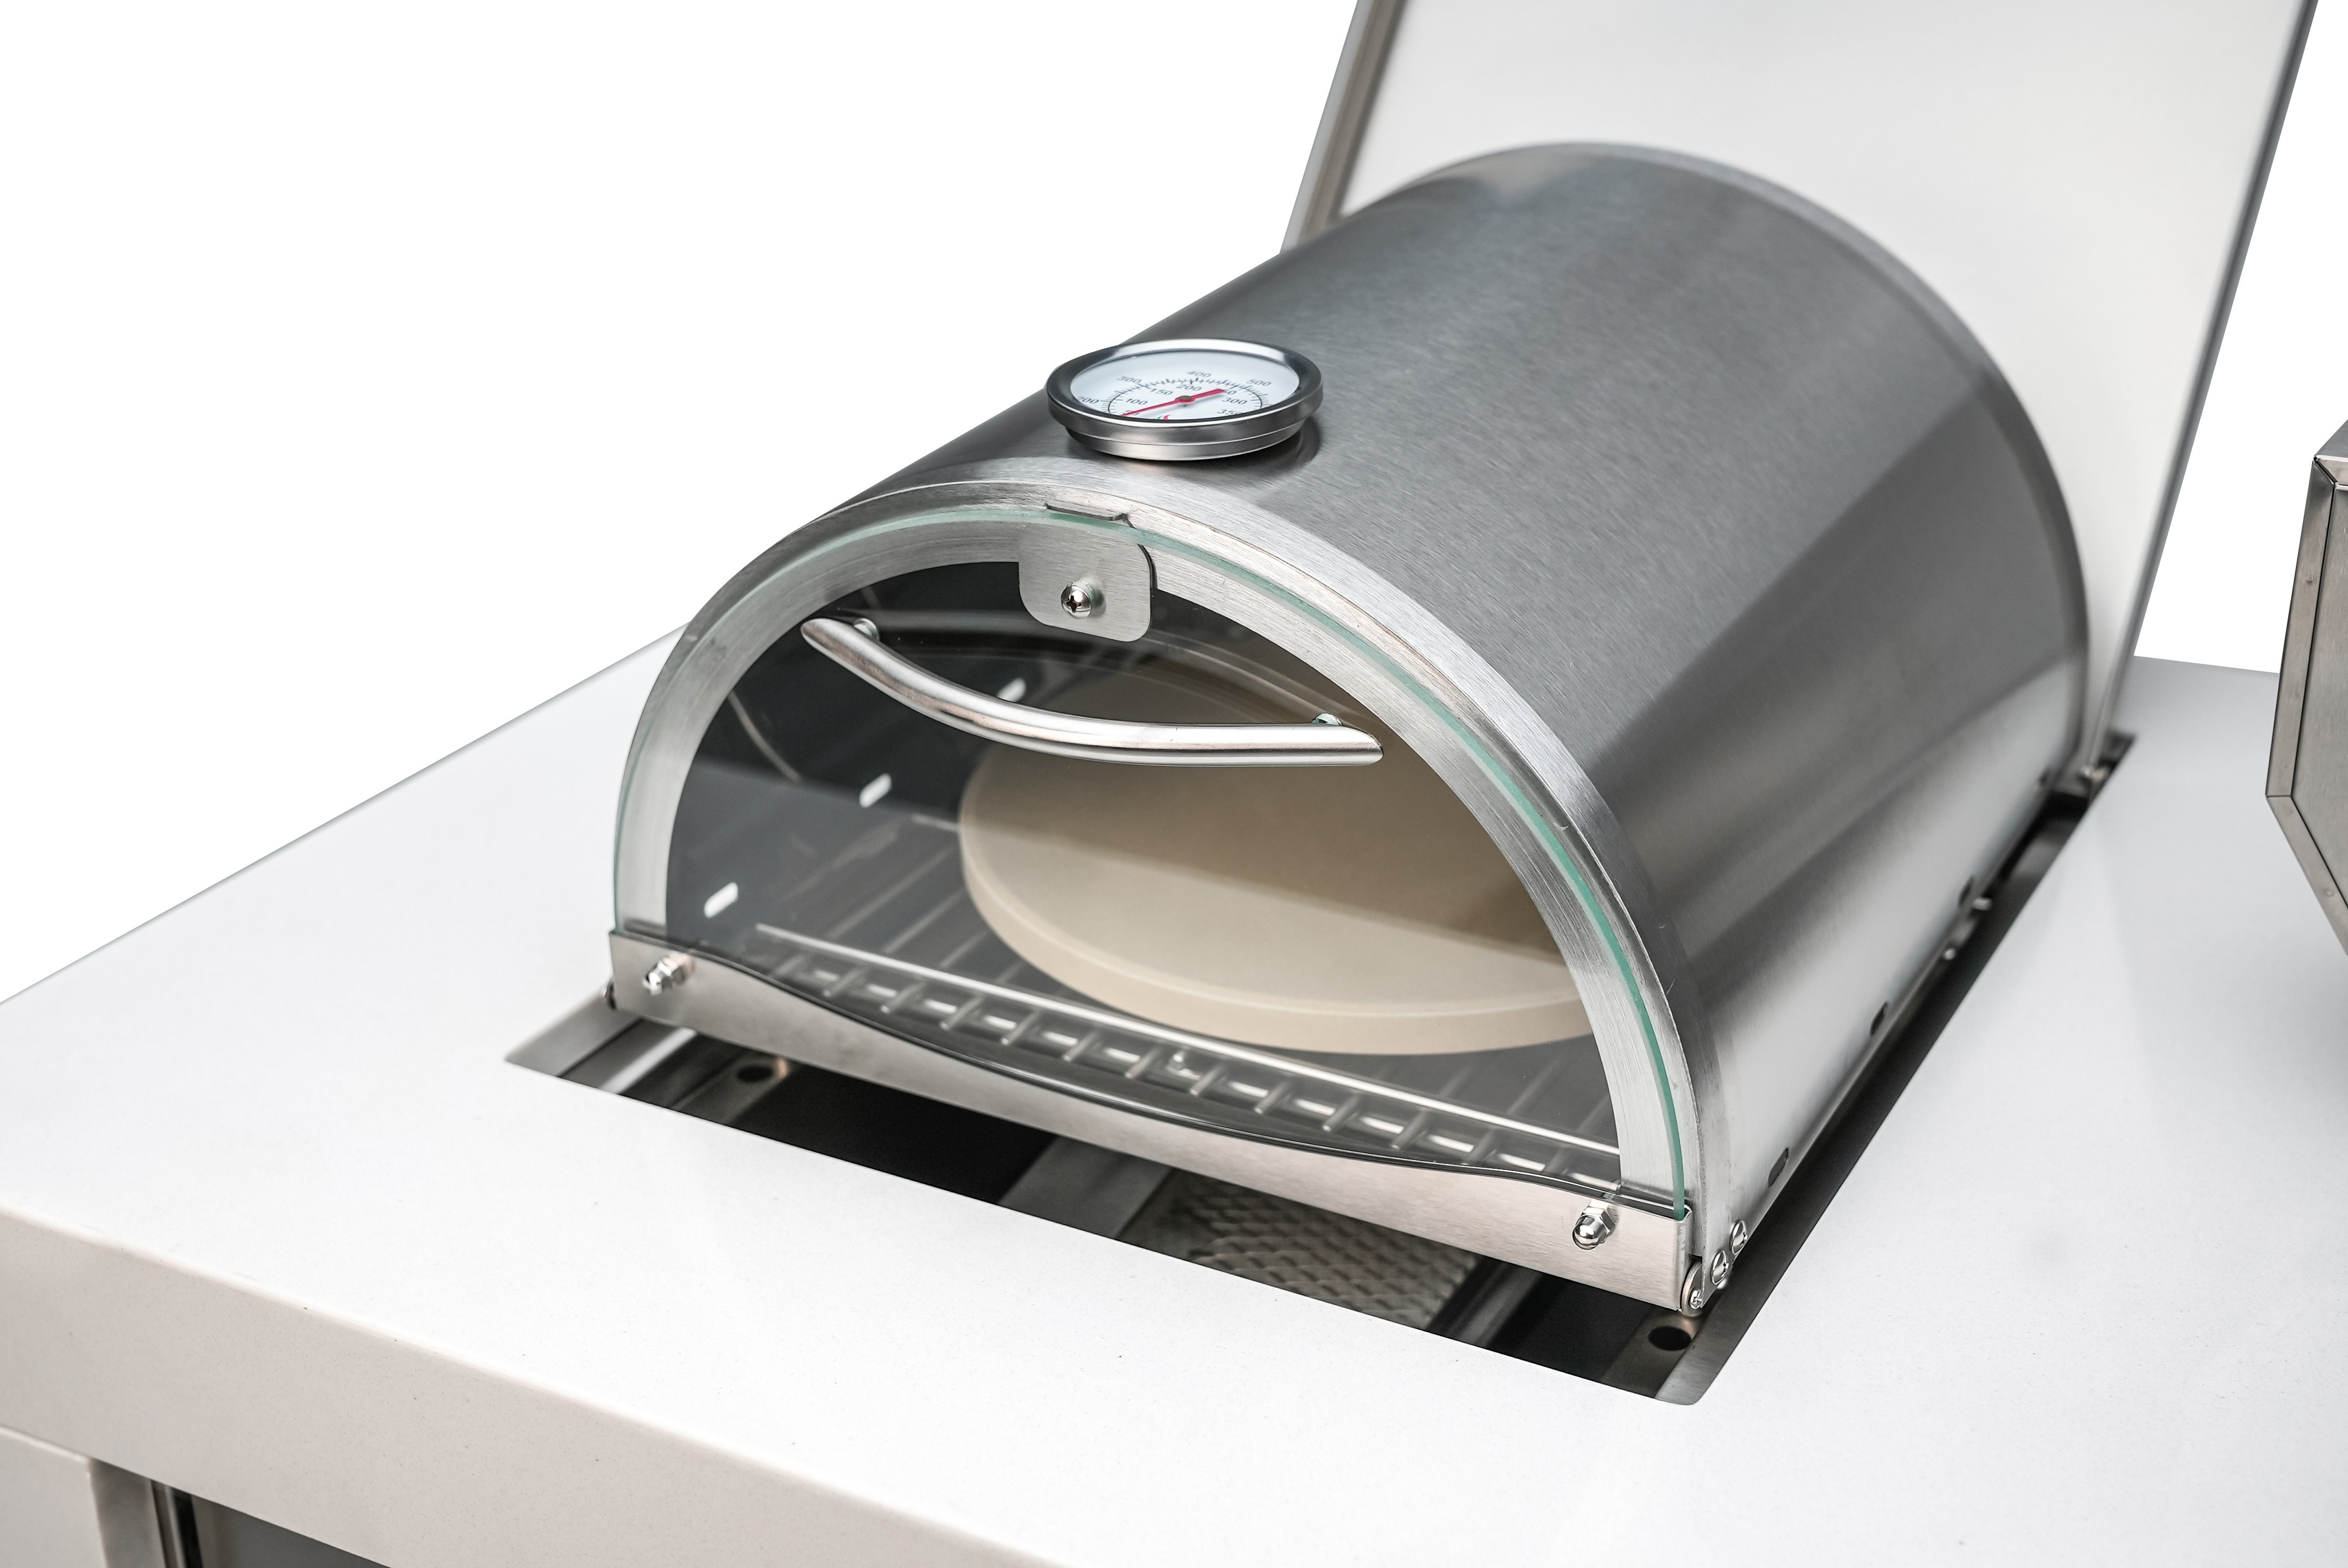 Mont Alpi Portable Table Top Stainless Steel Pizza Oven MAPZ-SS